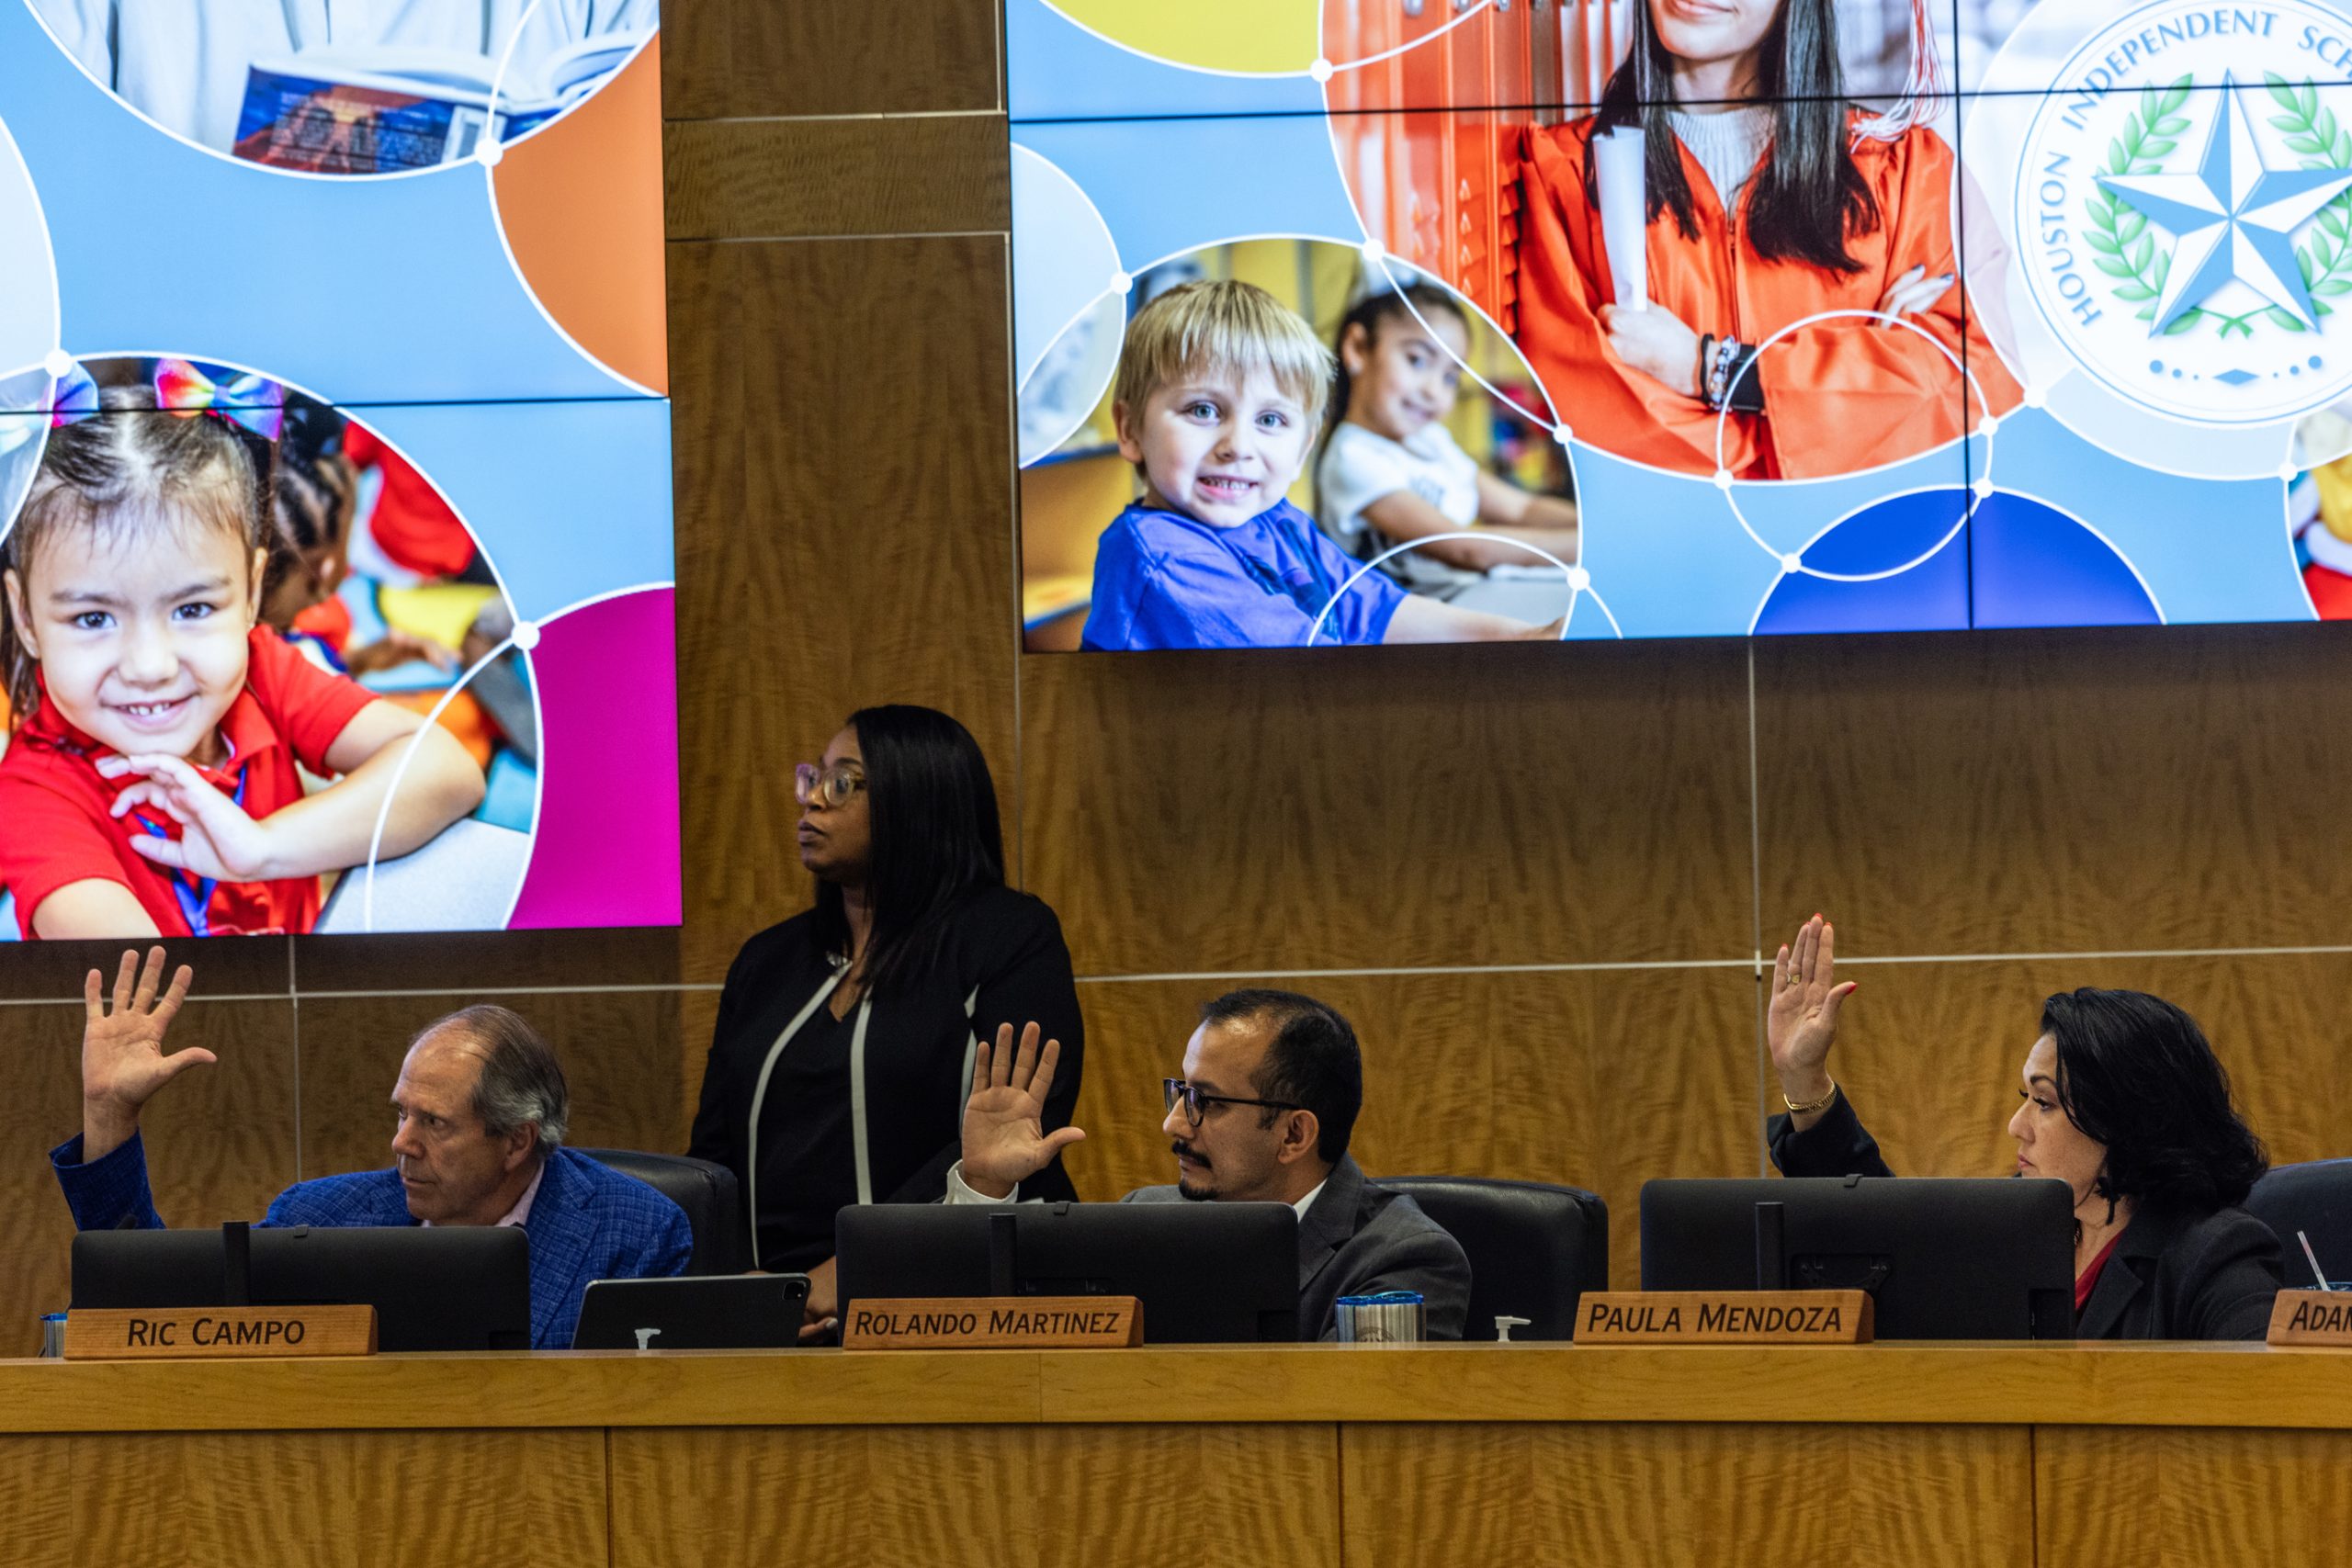 Houston ISD board members cast a vote during a meeting Aug. 10 at the district's northwest Houston headquarters